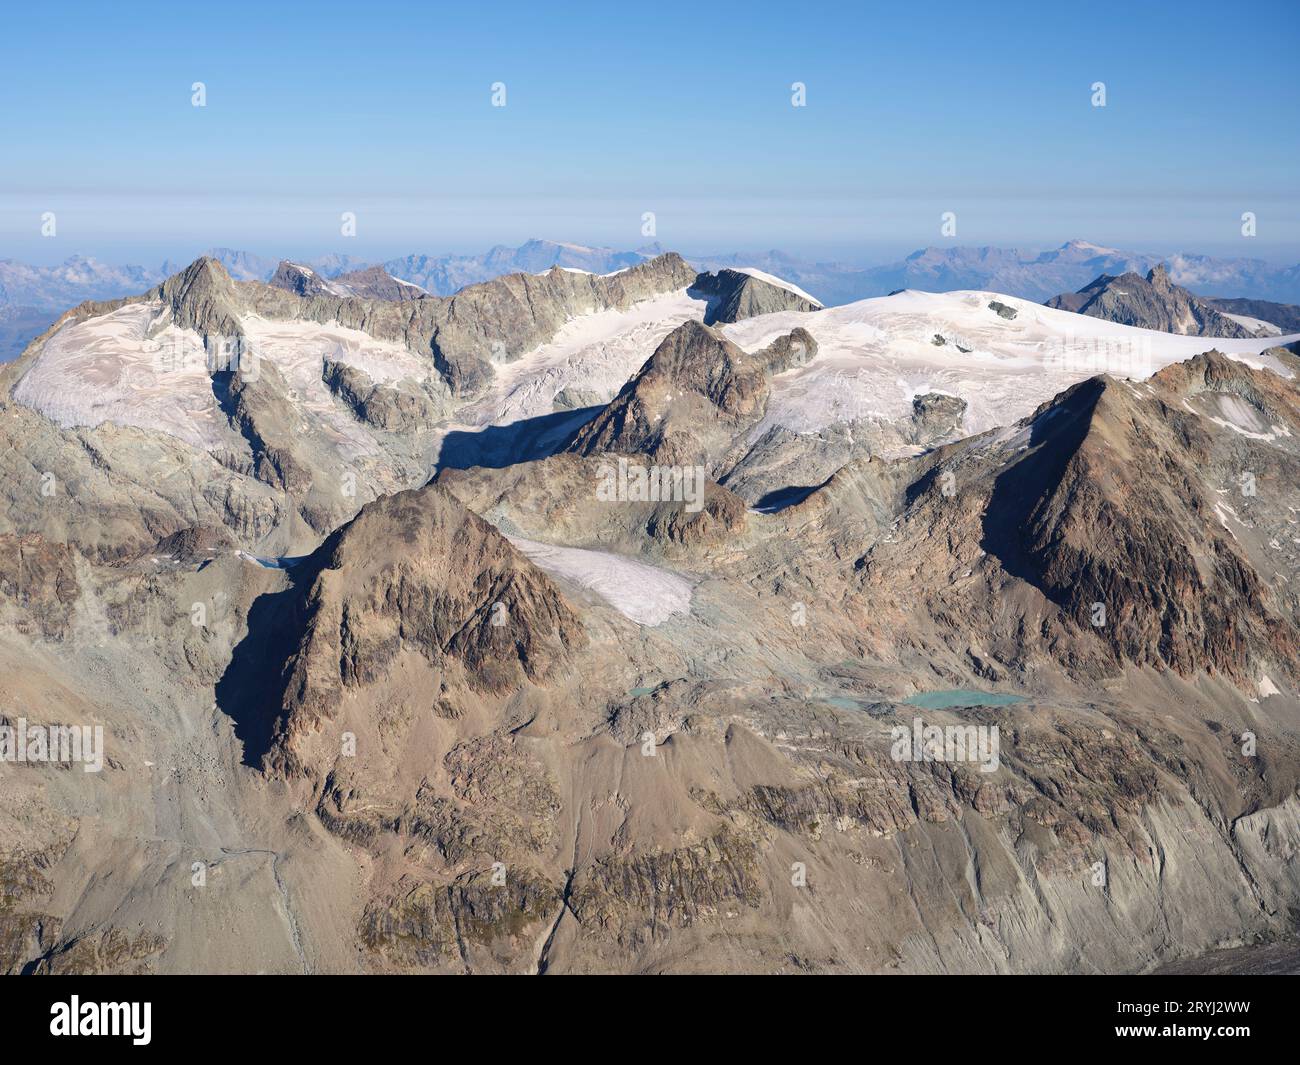 AERIAL VIEW. Mountain range between Val de Bagnes and Evolène, La Ruinette (3875m) on the left is the highest summit. Canton of Valais, Switzerland. Stock Photo